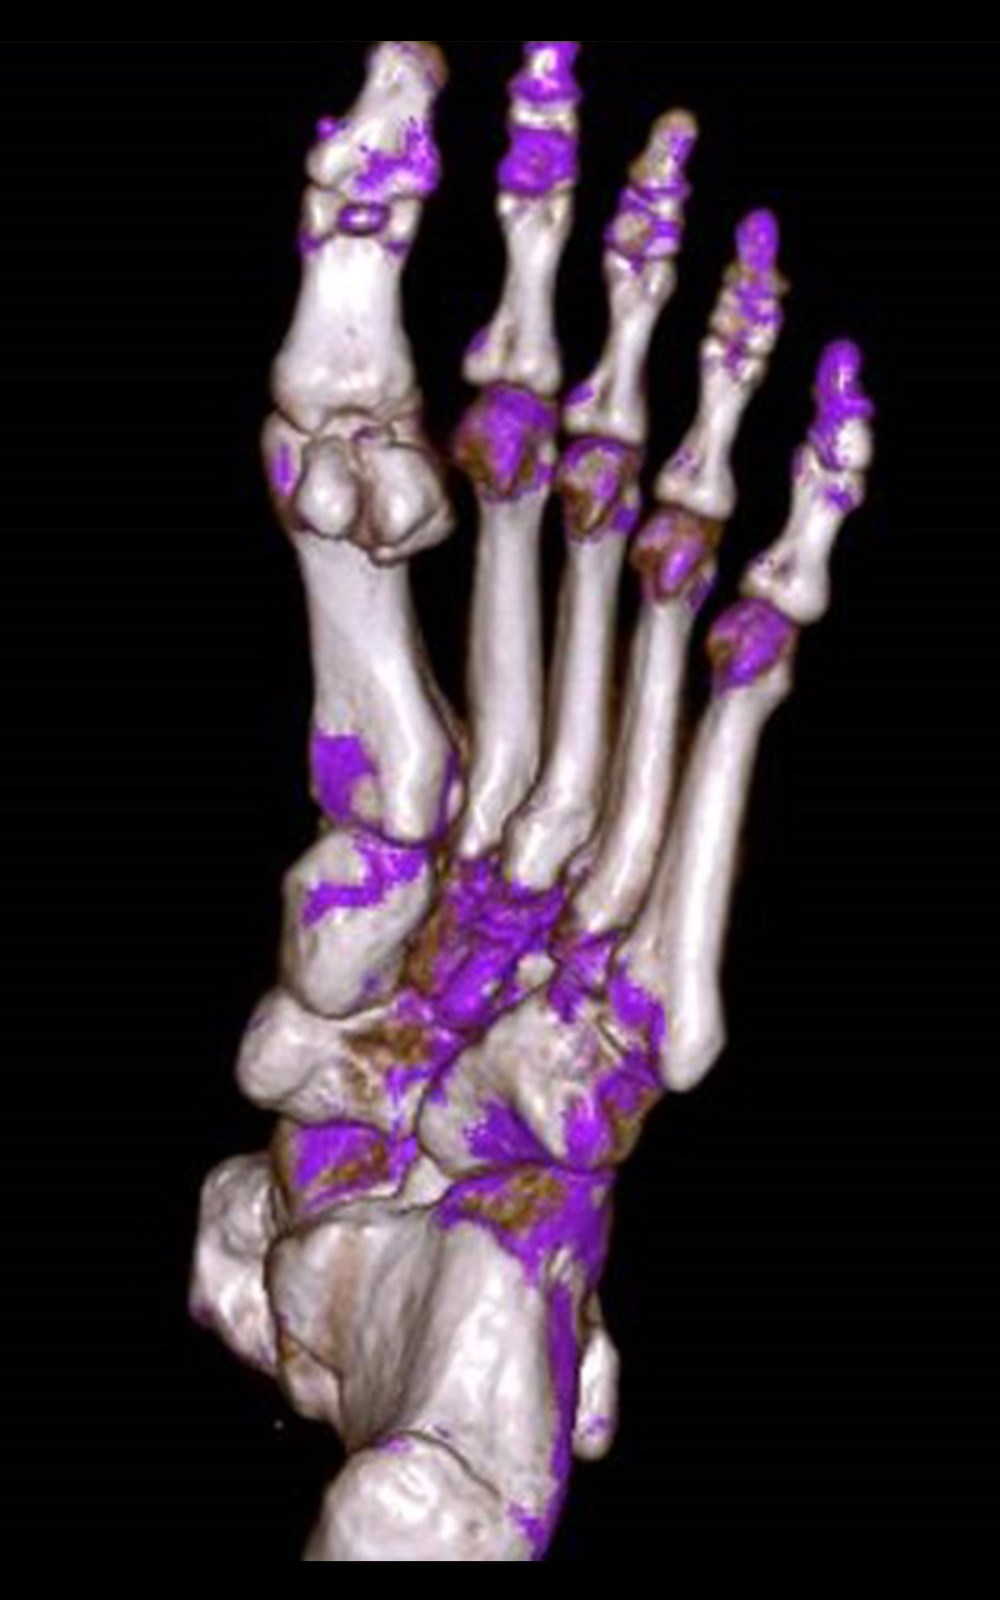 Noncontrast dual-energy computed tomography of the left foot showing the absence of monosodium urate crystal deposition. There are multiple periarticular erosions in the tarsal and metatarsal bases.